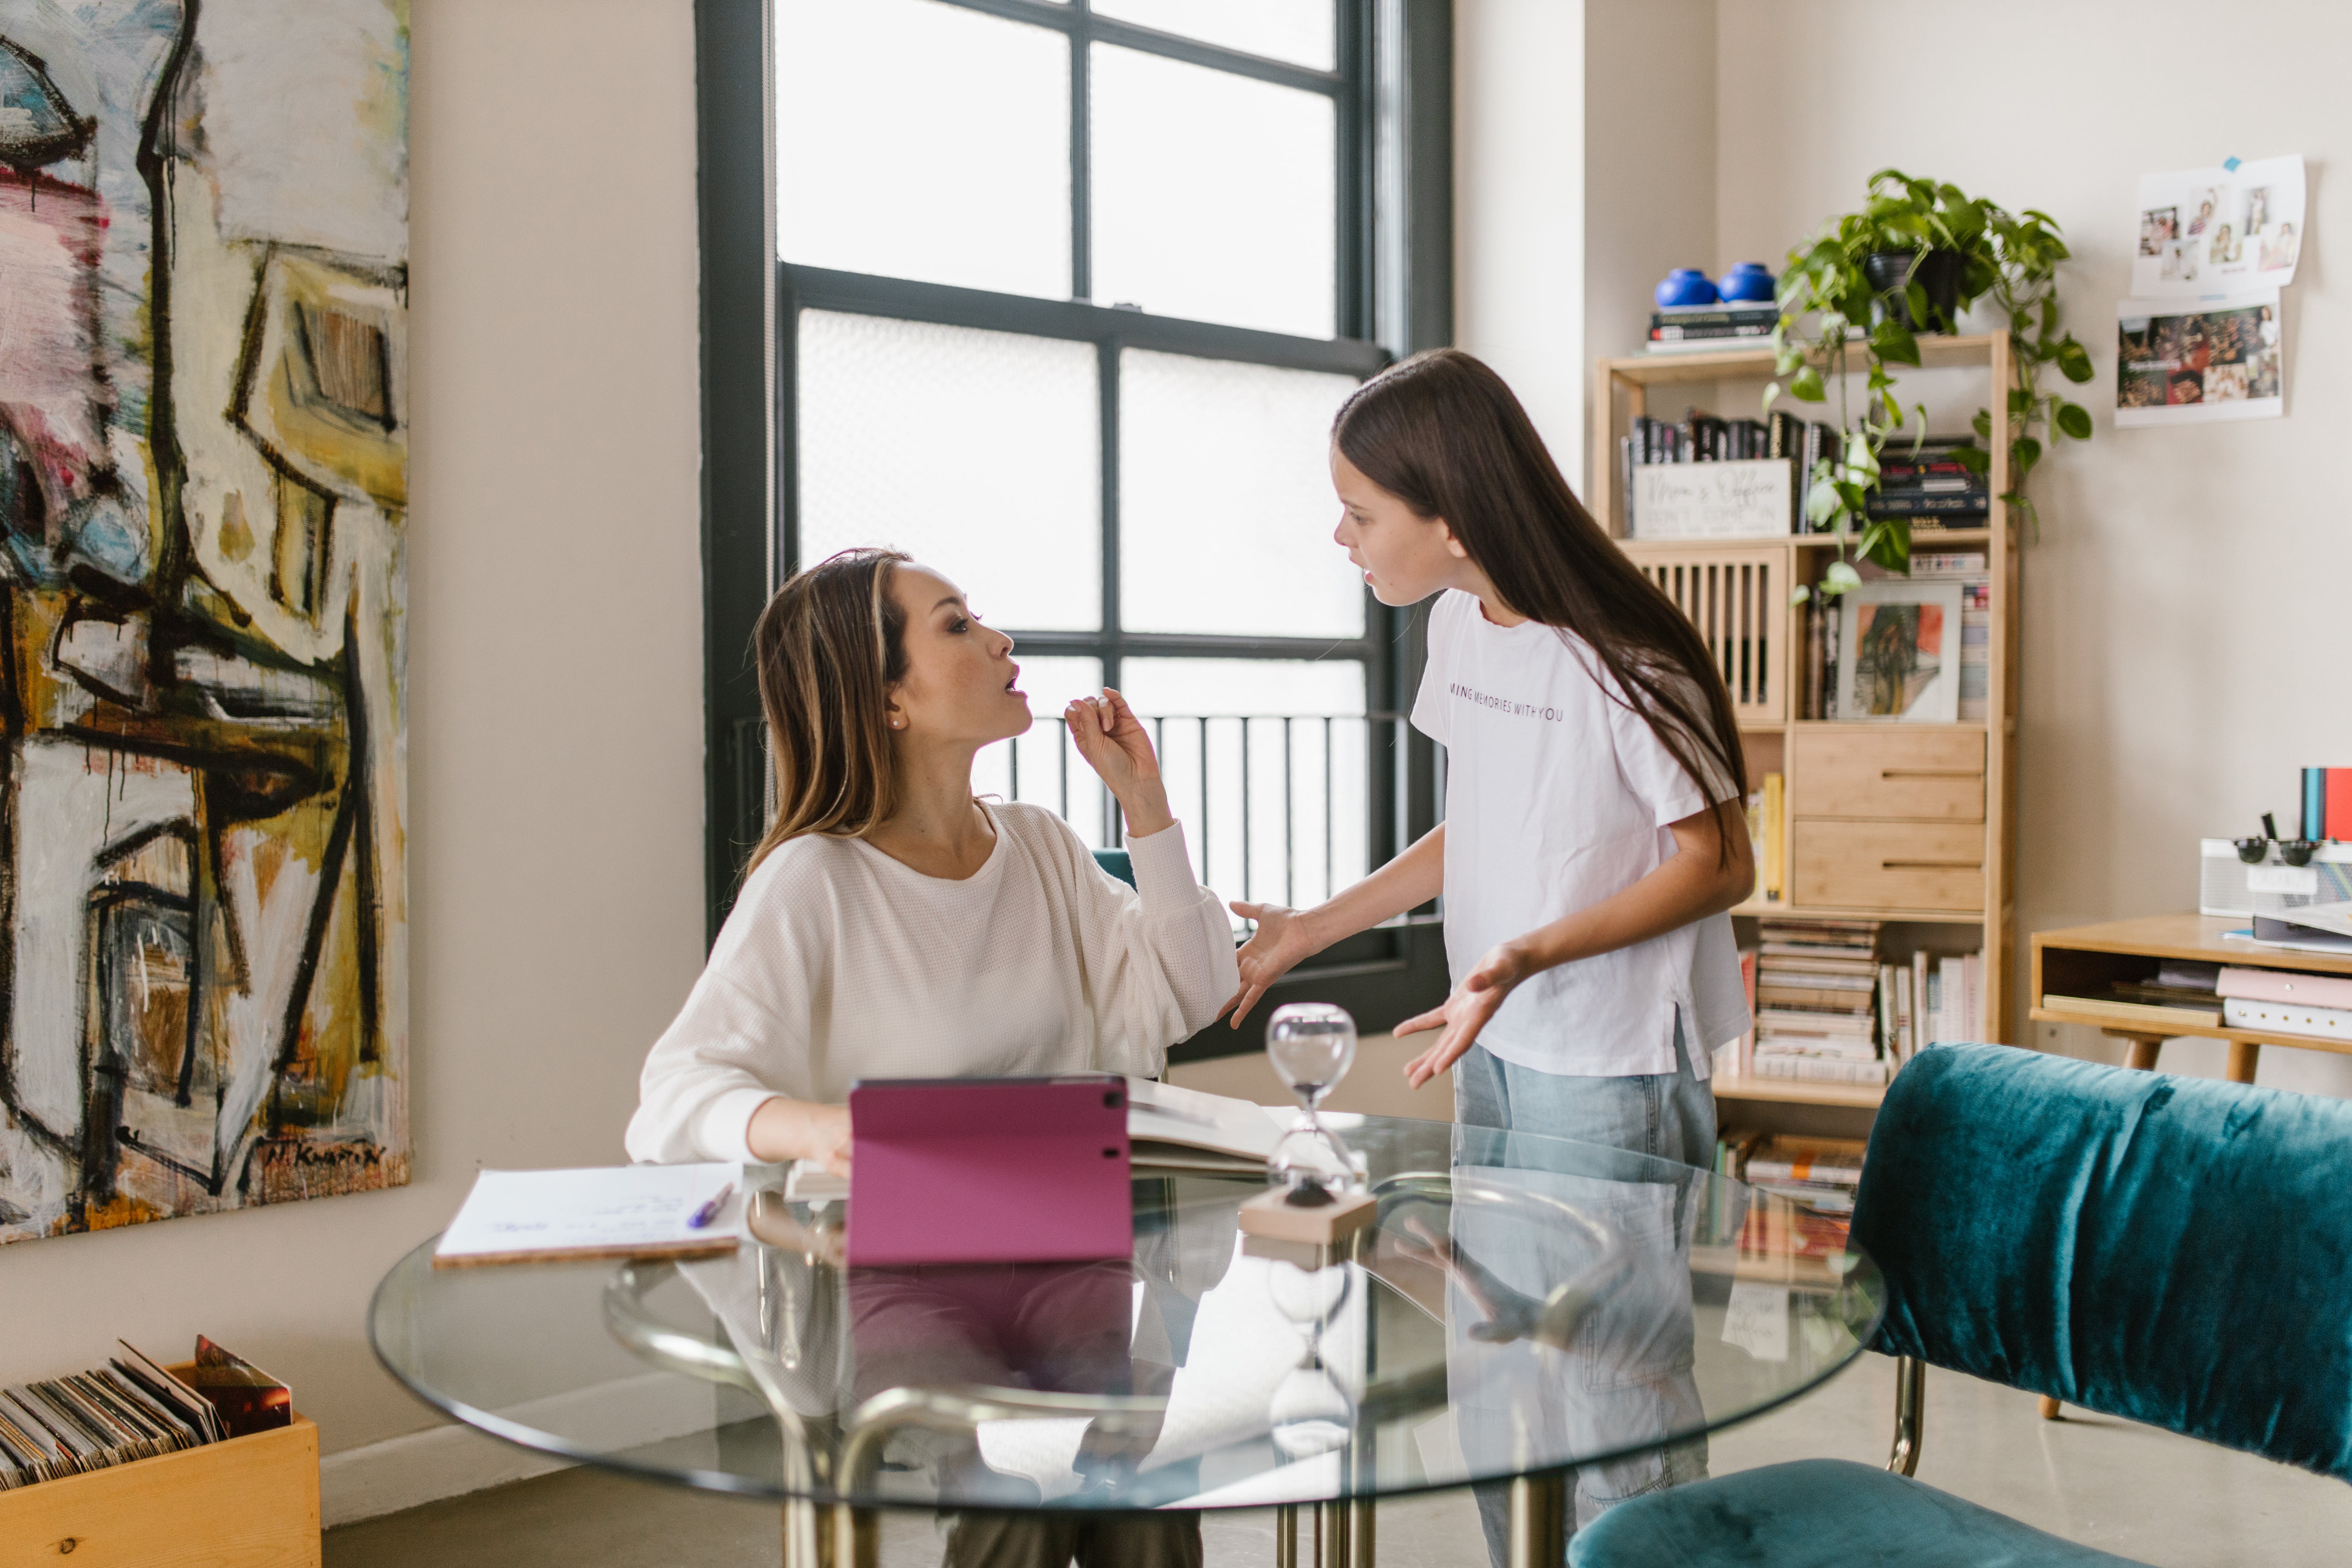 Mother and daughter having an argument | Source: Pexels